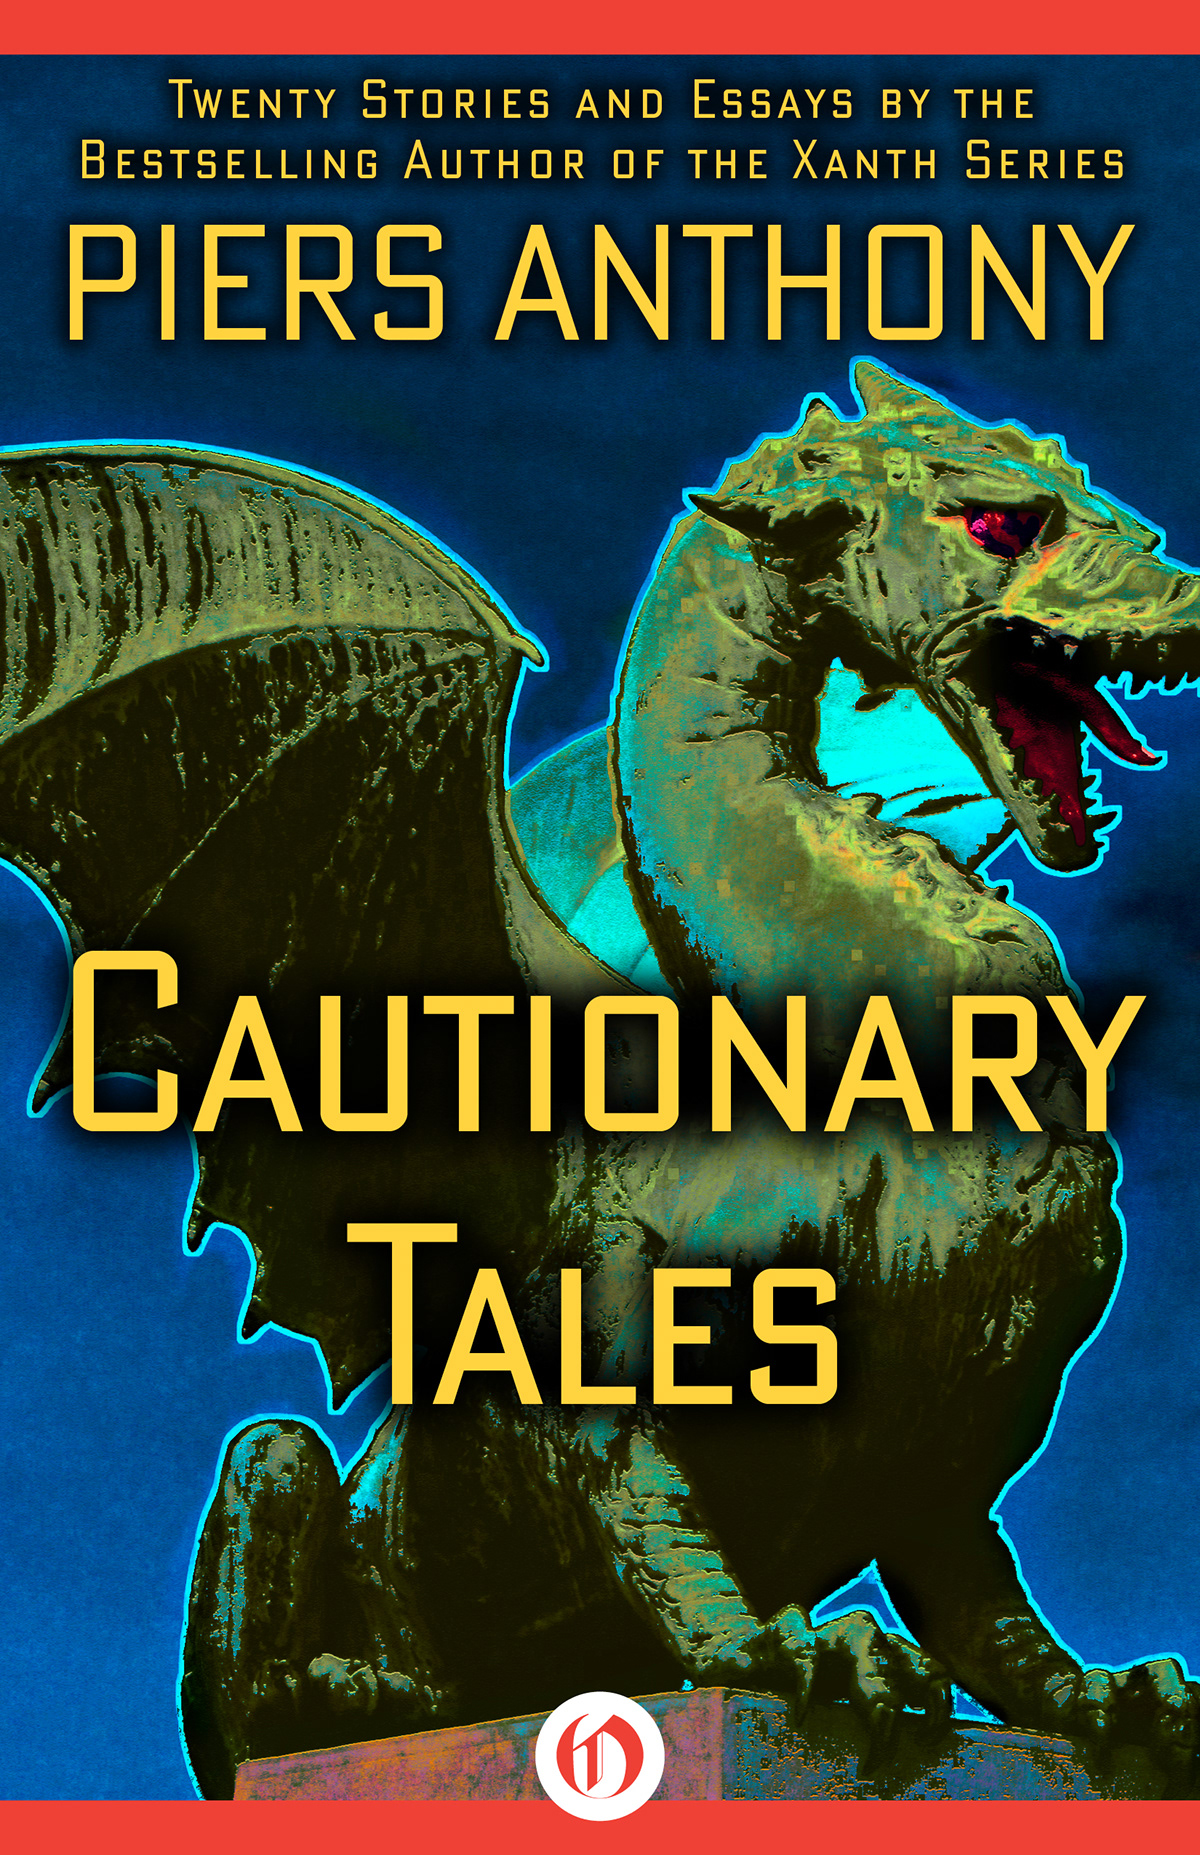 Piers Anthony Aliena Too Cautionary Tales One and Wonder WereWoman sci-fi science fiction detective short stories novel